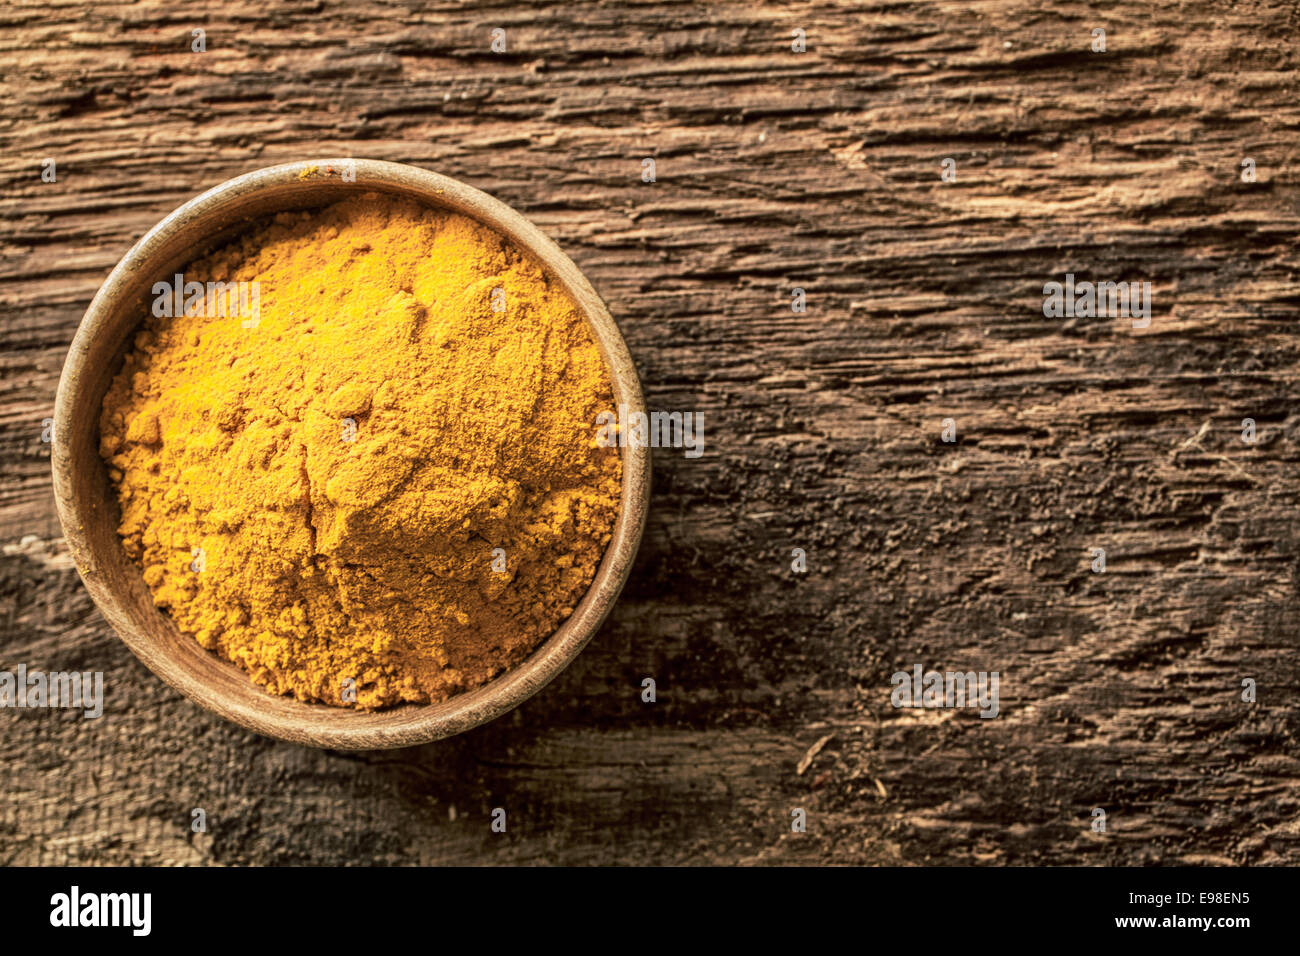 Asian curry powder made from a blend of spices with a masala or turmeric base in a small bowl on a grunge textured wooden surface, overhead view with copyspace Stock Photo